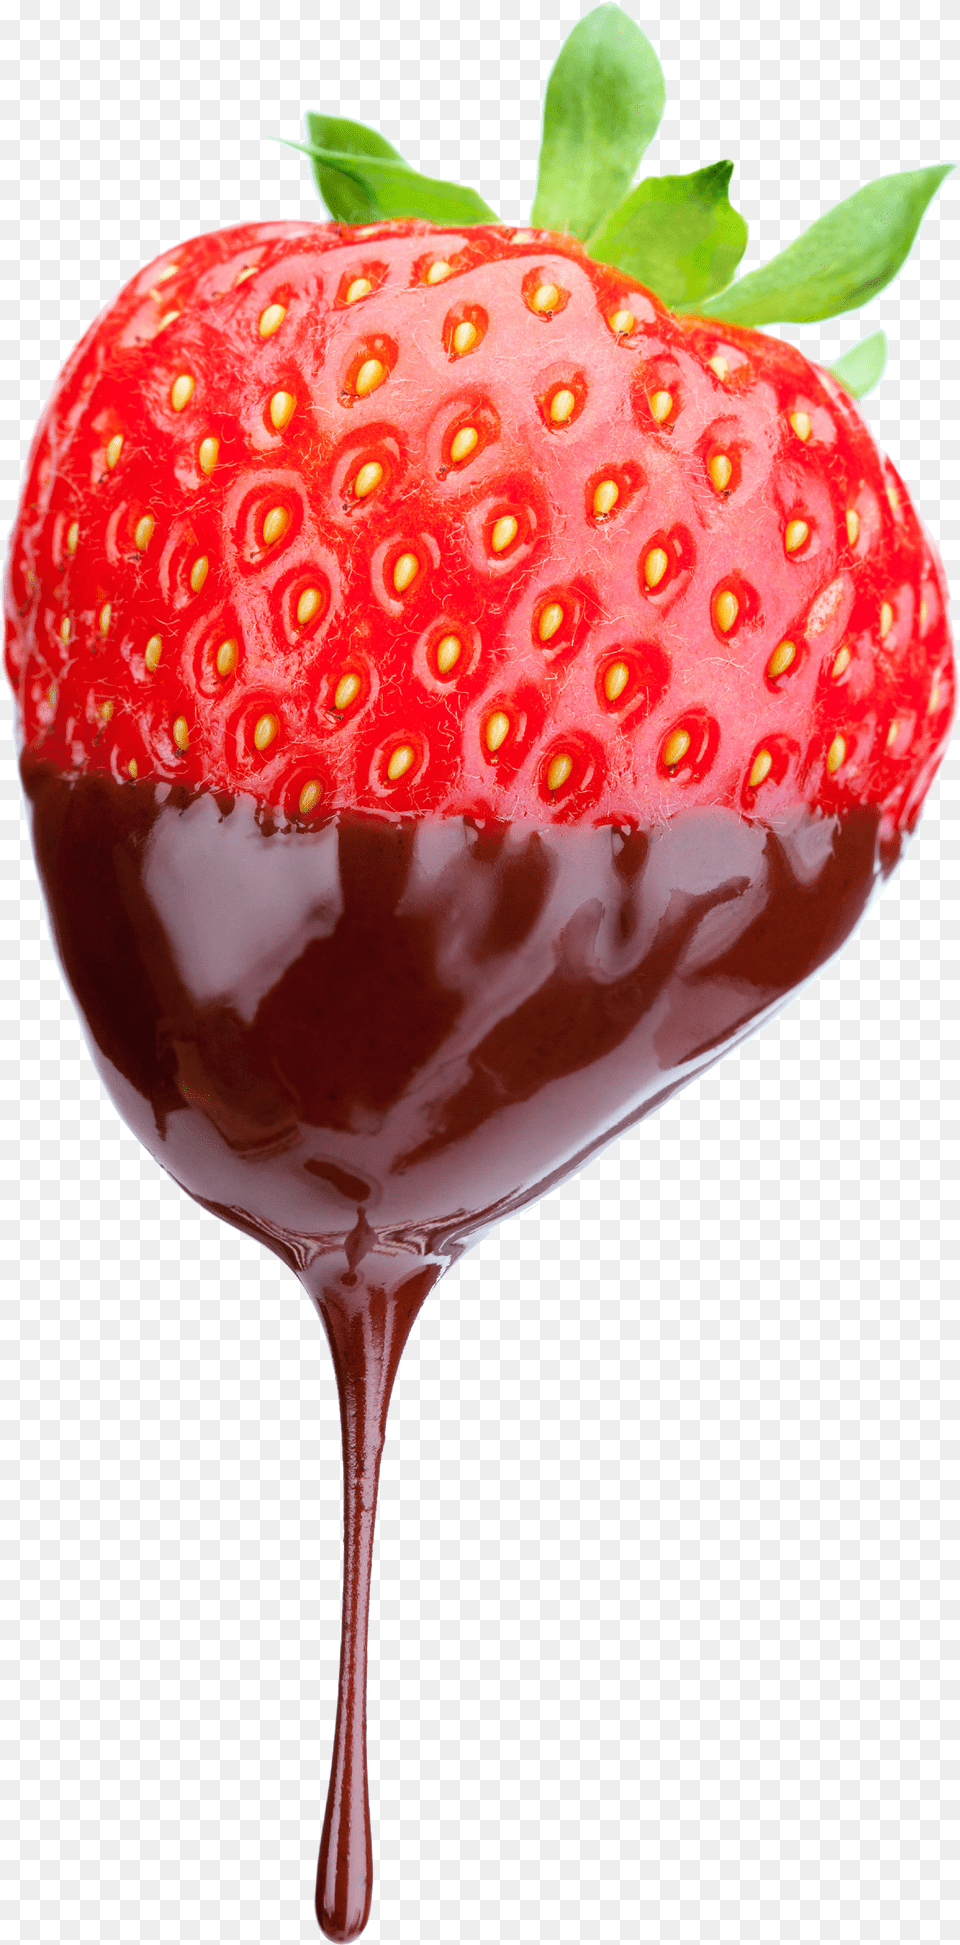 Strawberry Peoples Rx Austinu0027s Favorite Pharmacy Strawberry With Dripping Chocolate Free Transparent Png